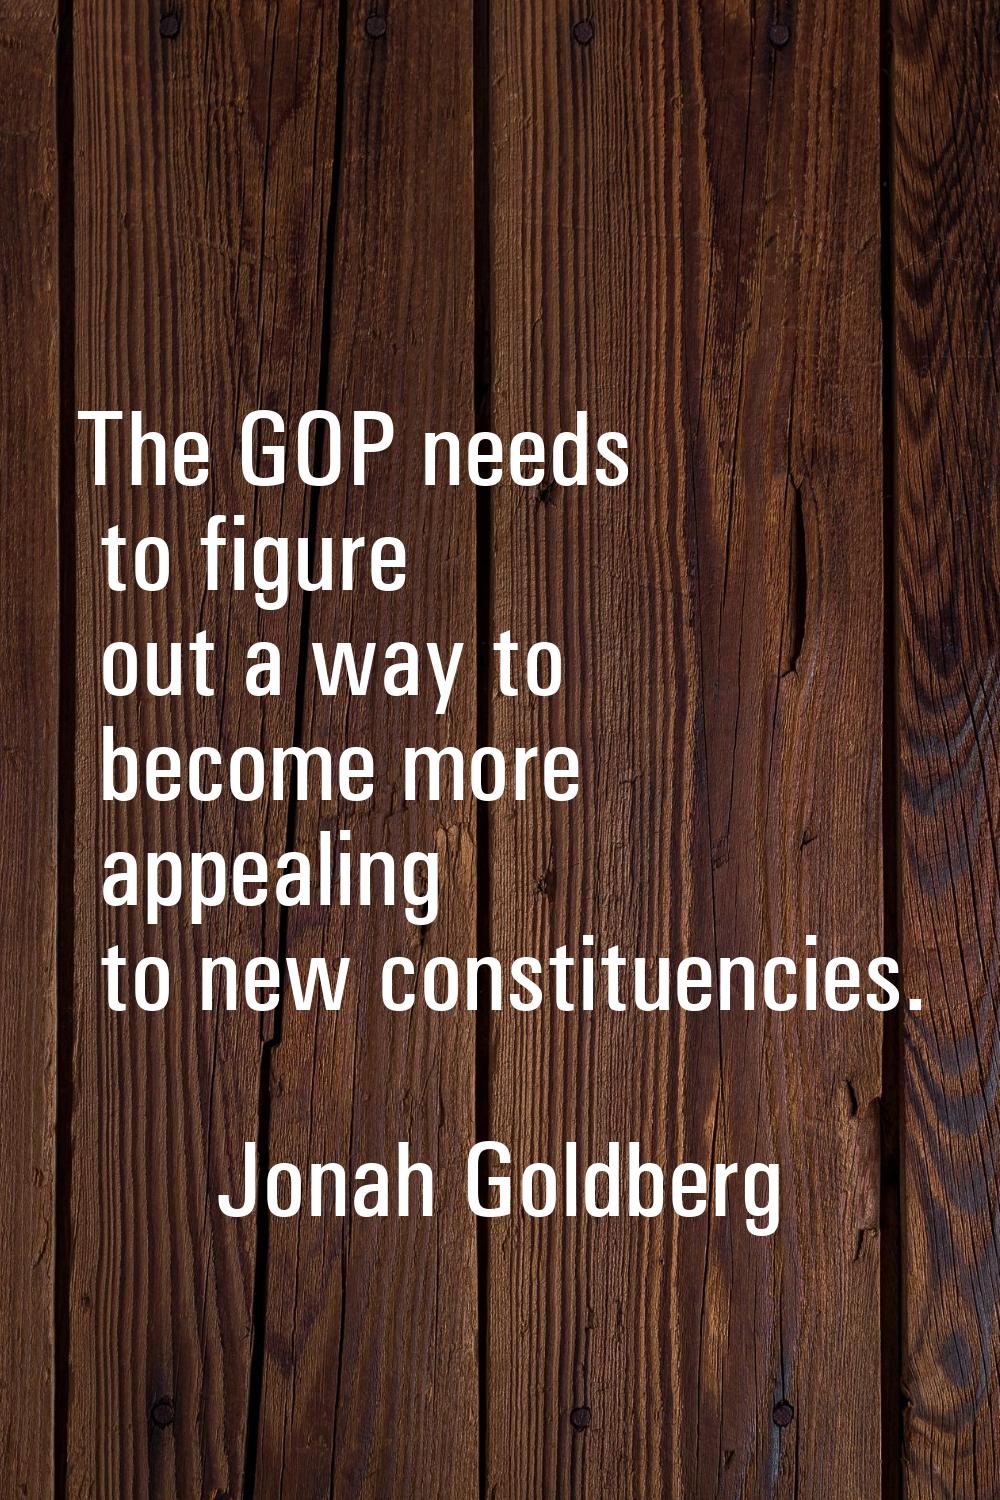 The GOP needs to figure out a way to become more appealing to new constituencies.